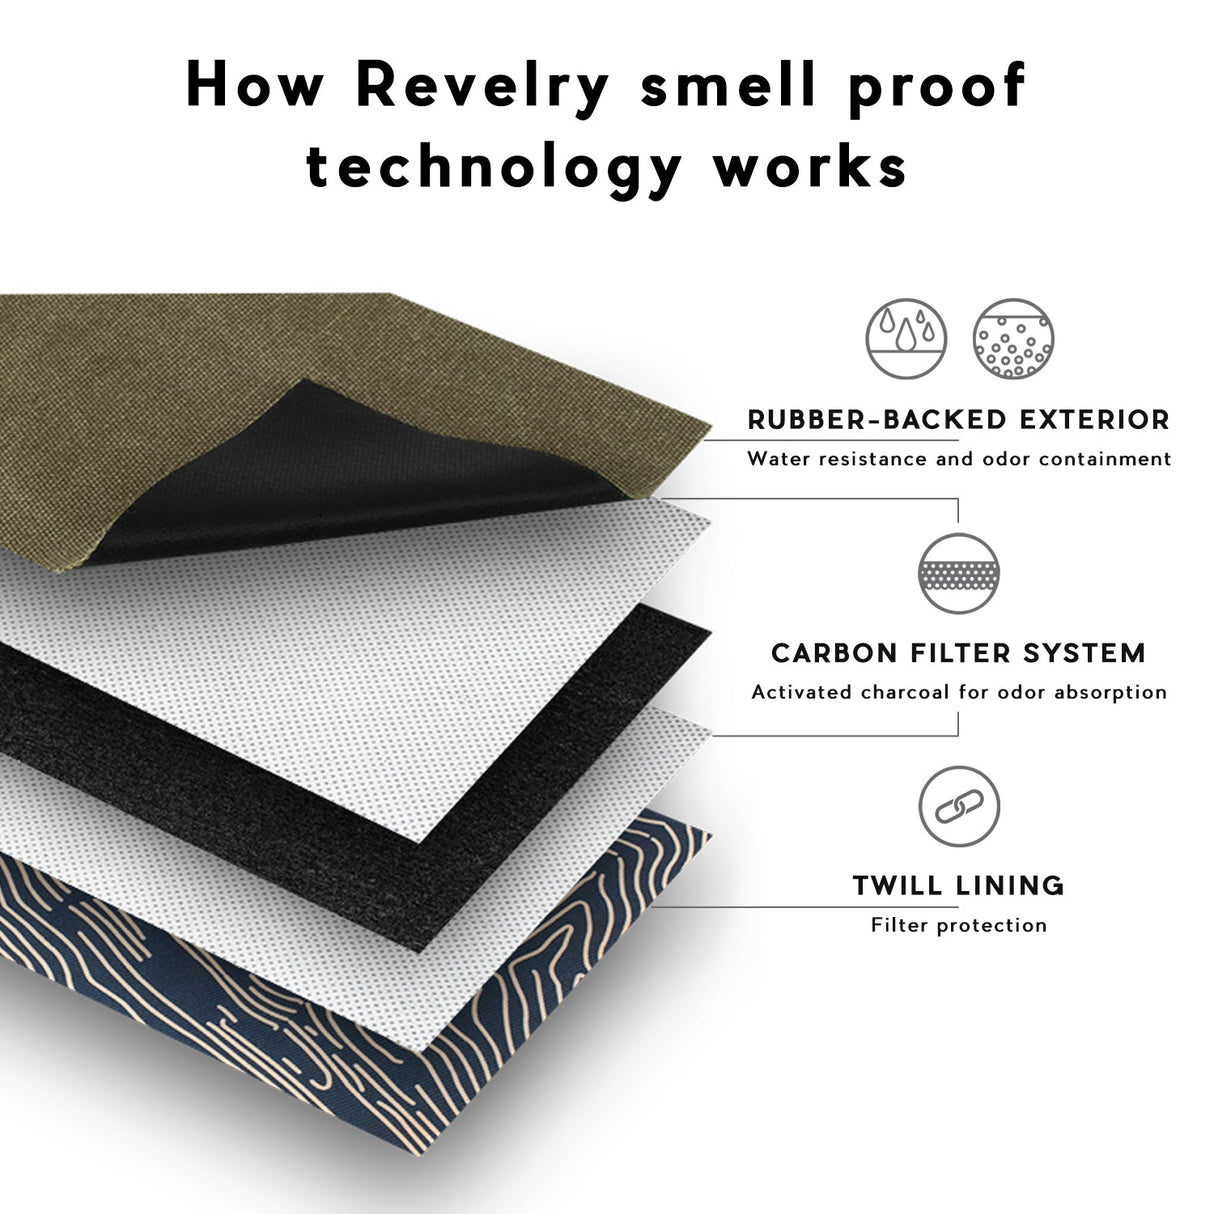 Revelry Supply's The Gordito Smell Proof Pouch layers demonstrating odor control technology